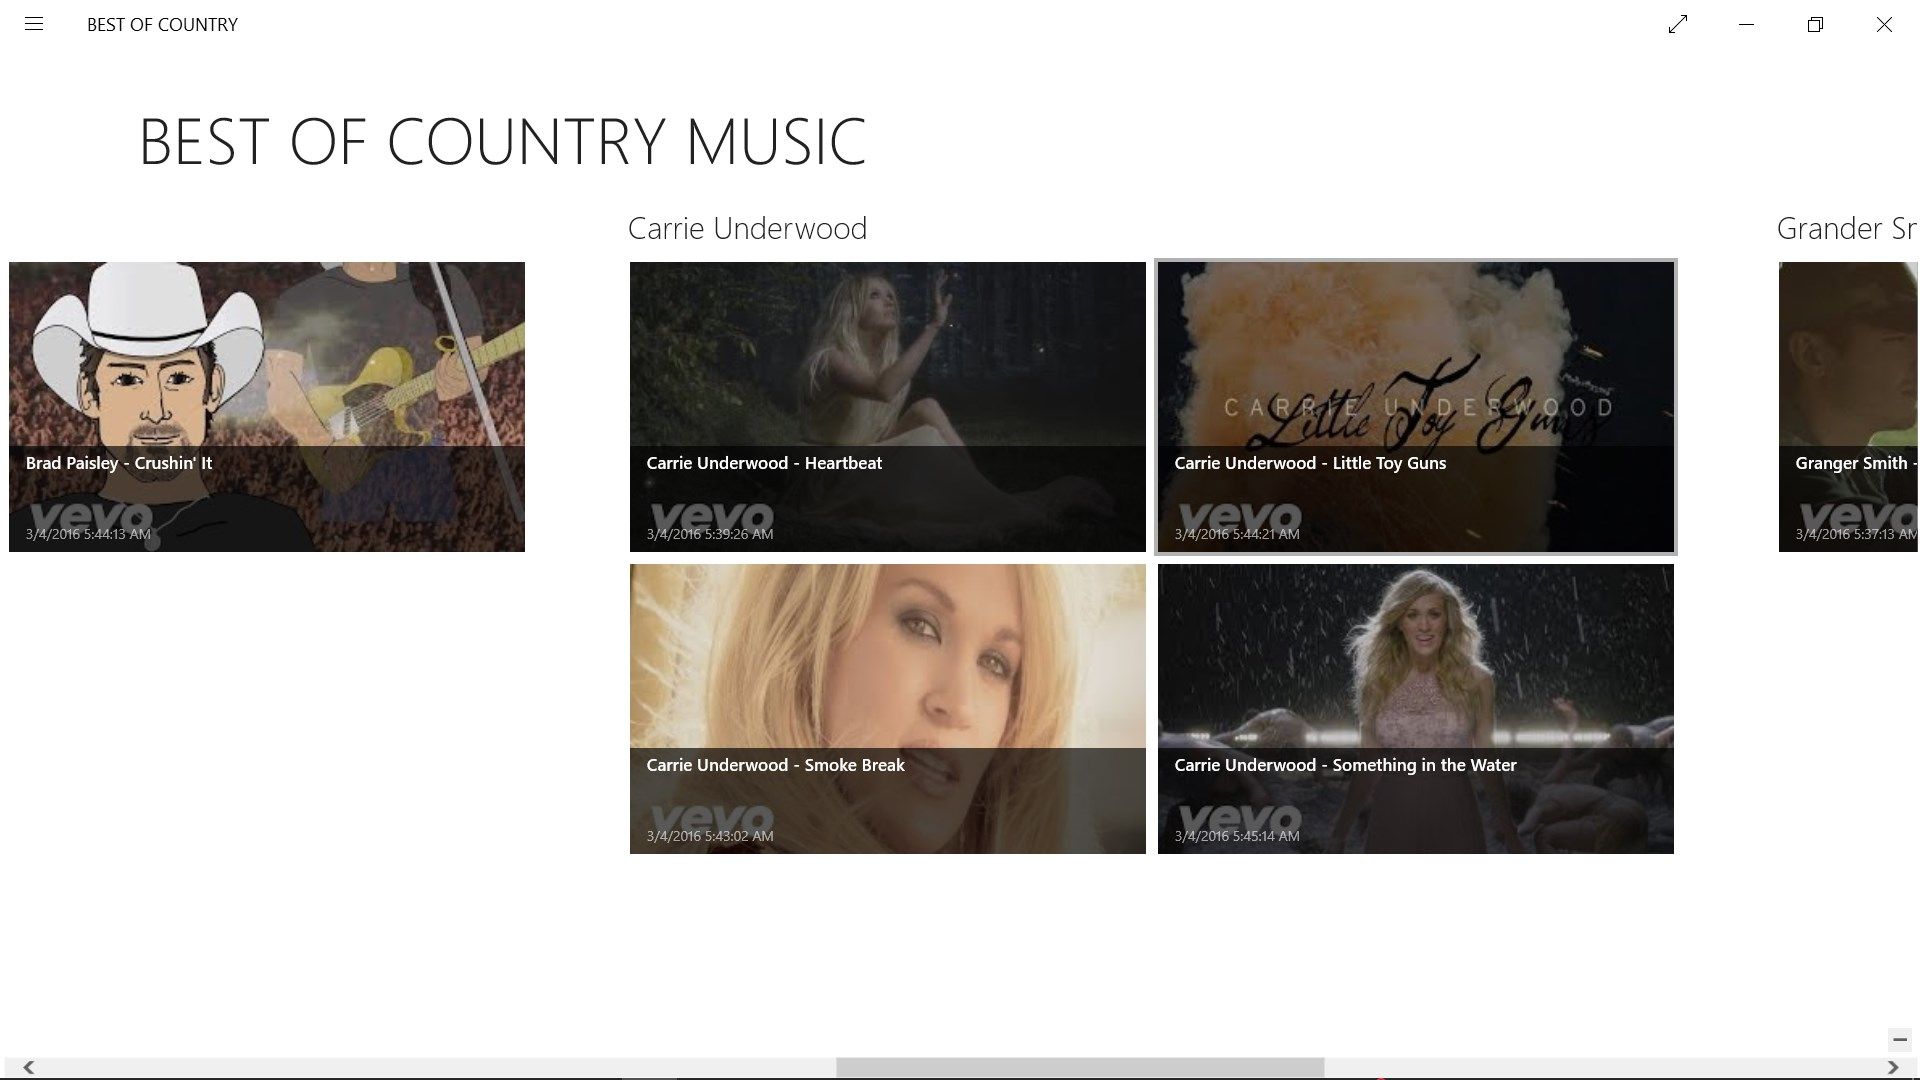 BEST OF COUNTRY MUSIC